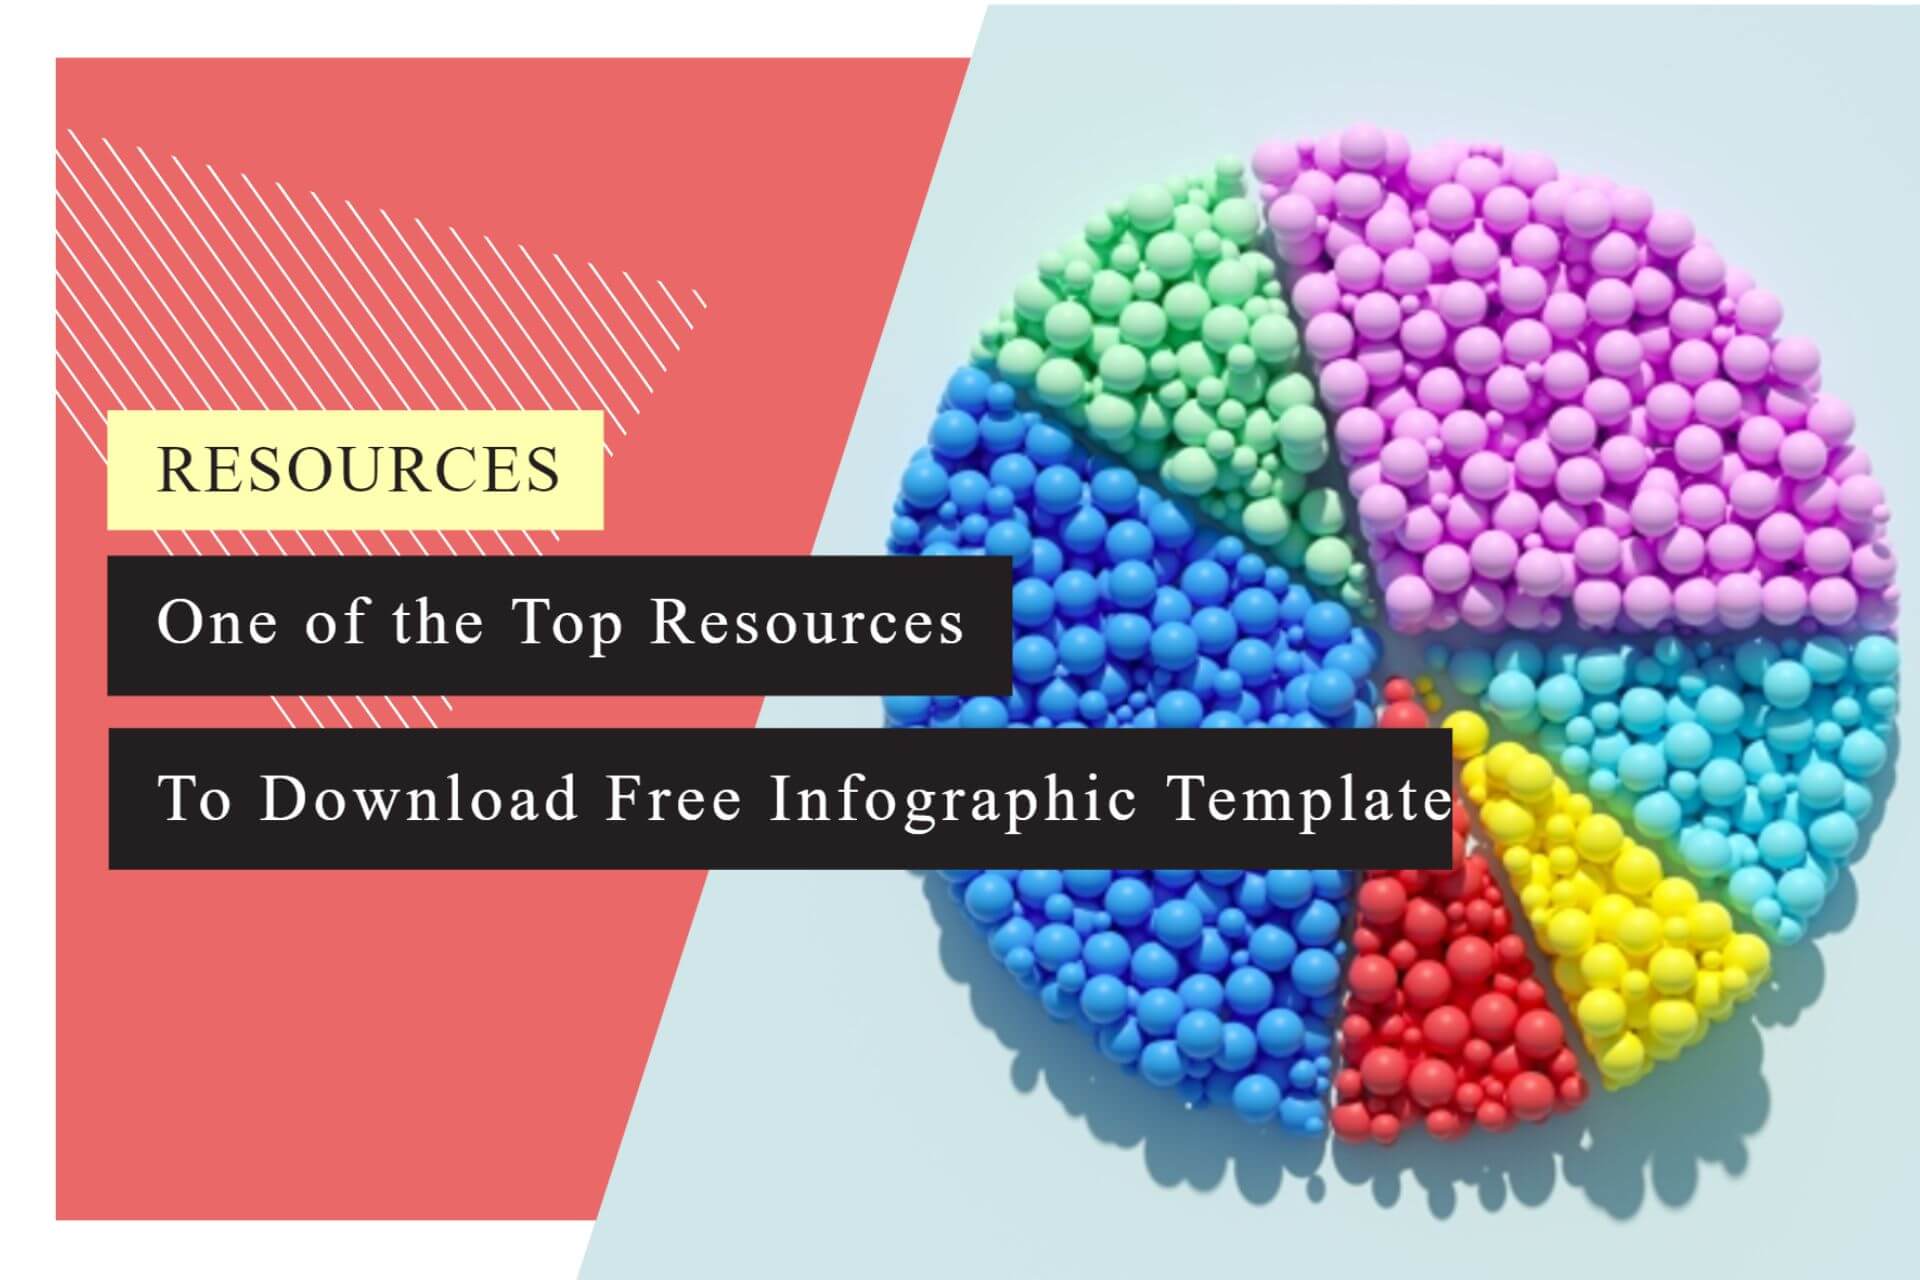 Download Free Infographic Template 2023 on illutAC